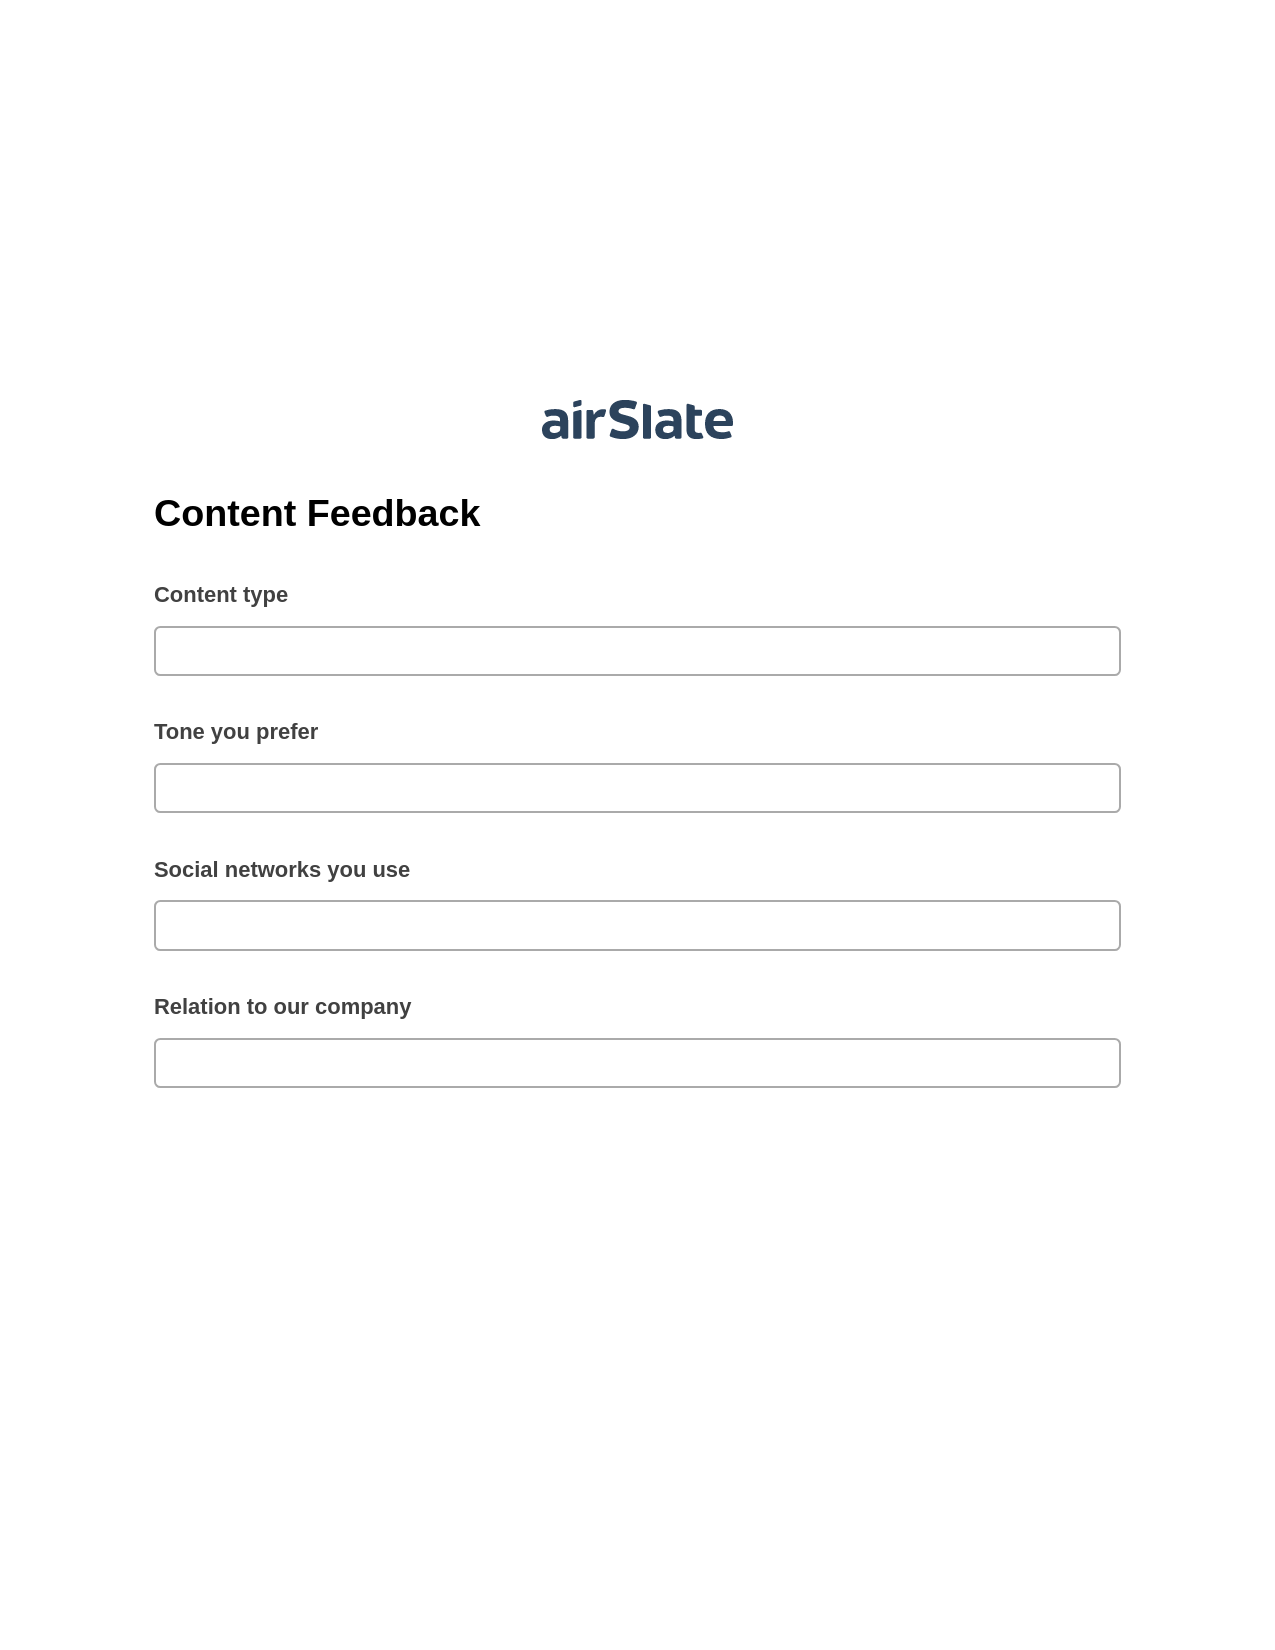 Content Feedback Pre-fill from CSV File Bot, Unassign Role Bot, Archive to SharePoint Folder Bot